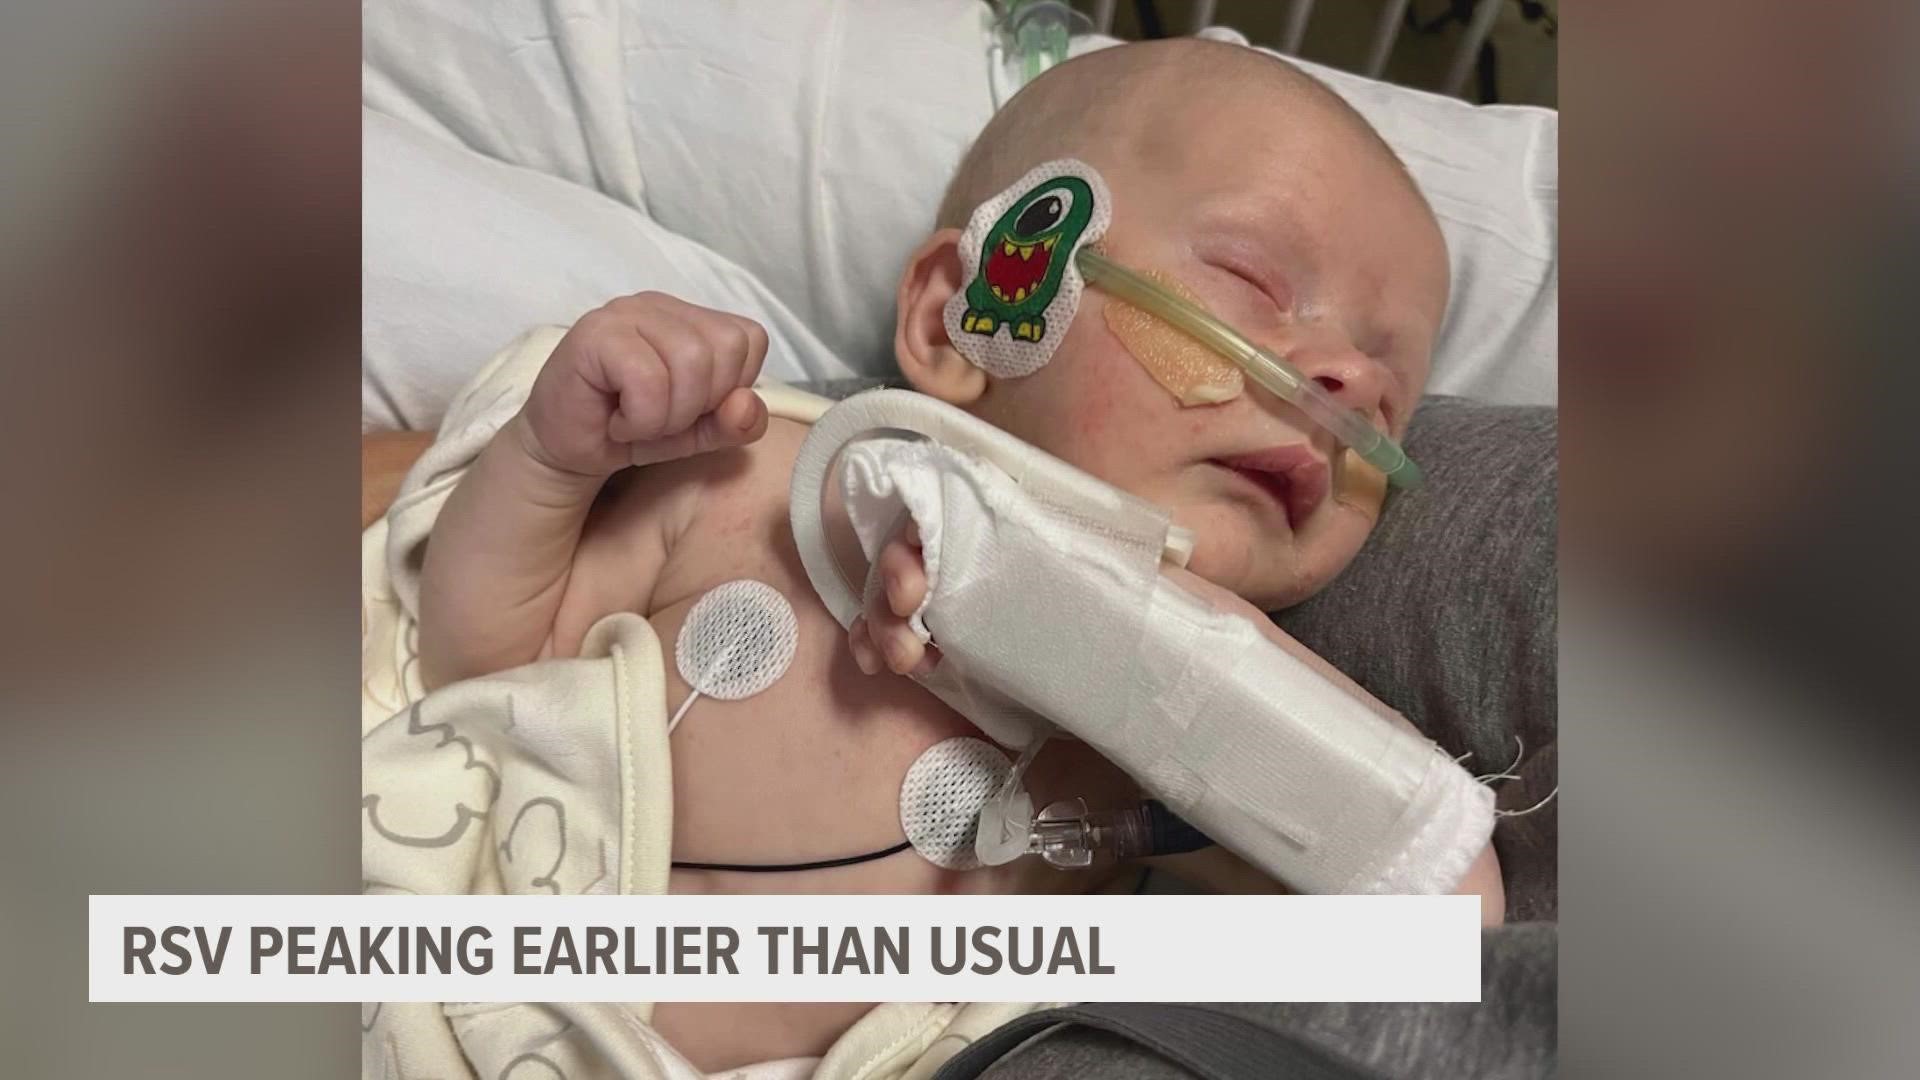 RSV, a respiratory illness found in children, is on the rise across the country, worrying doctors and parents of young children.